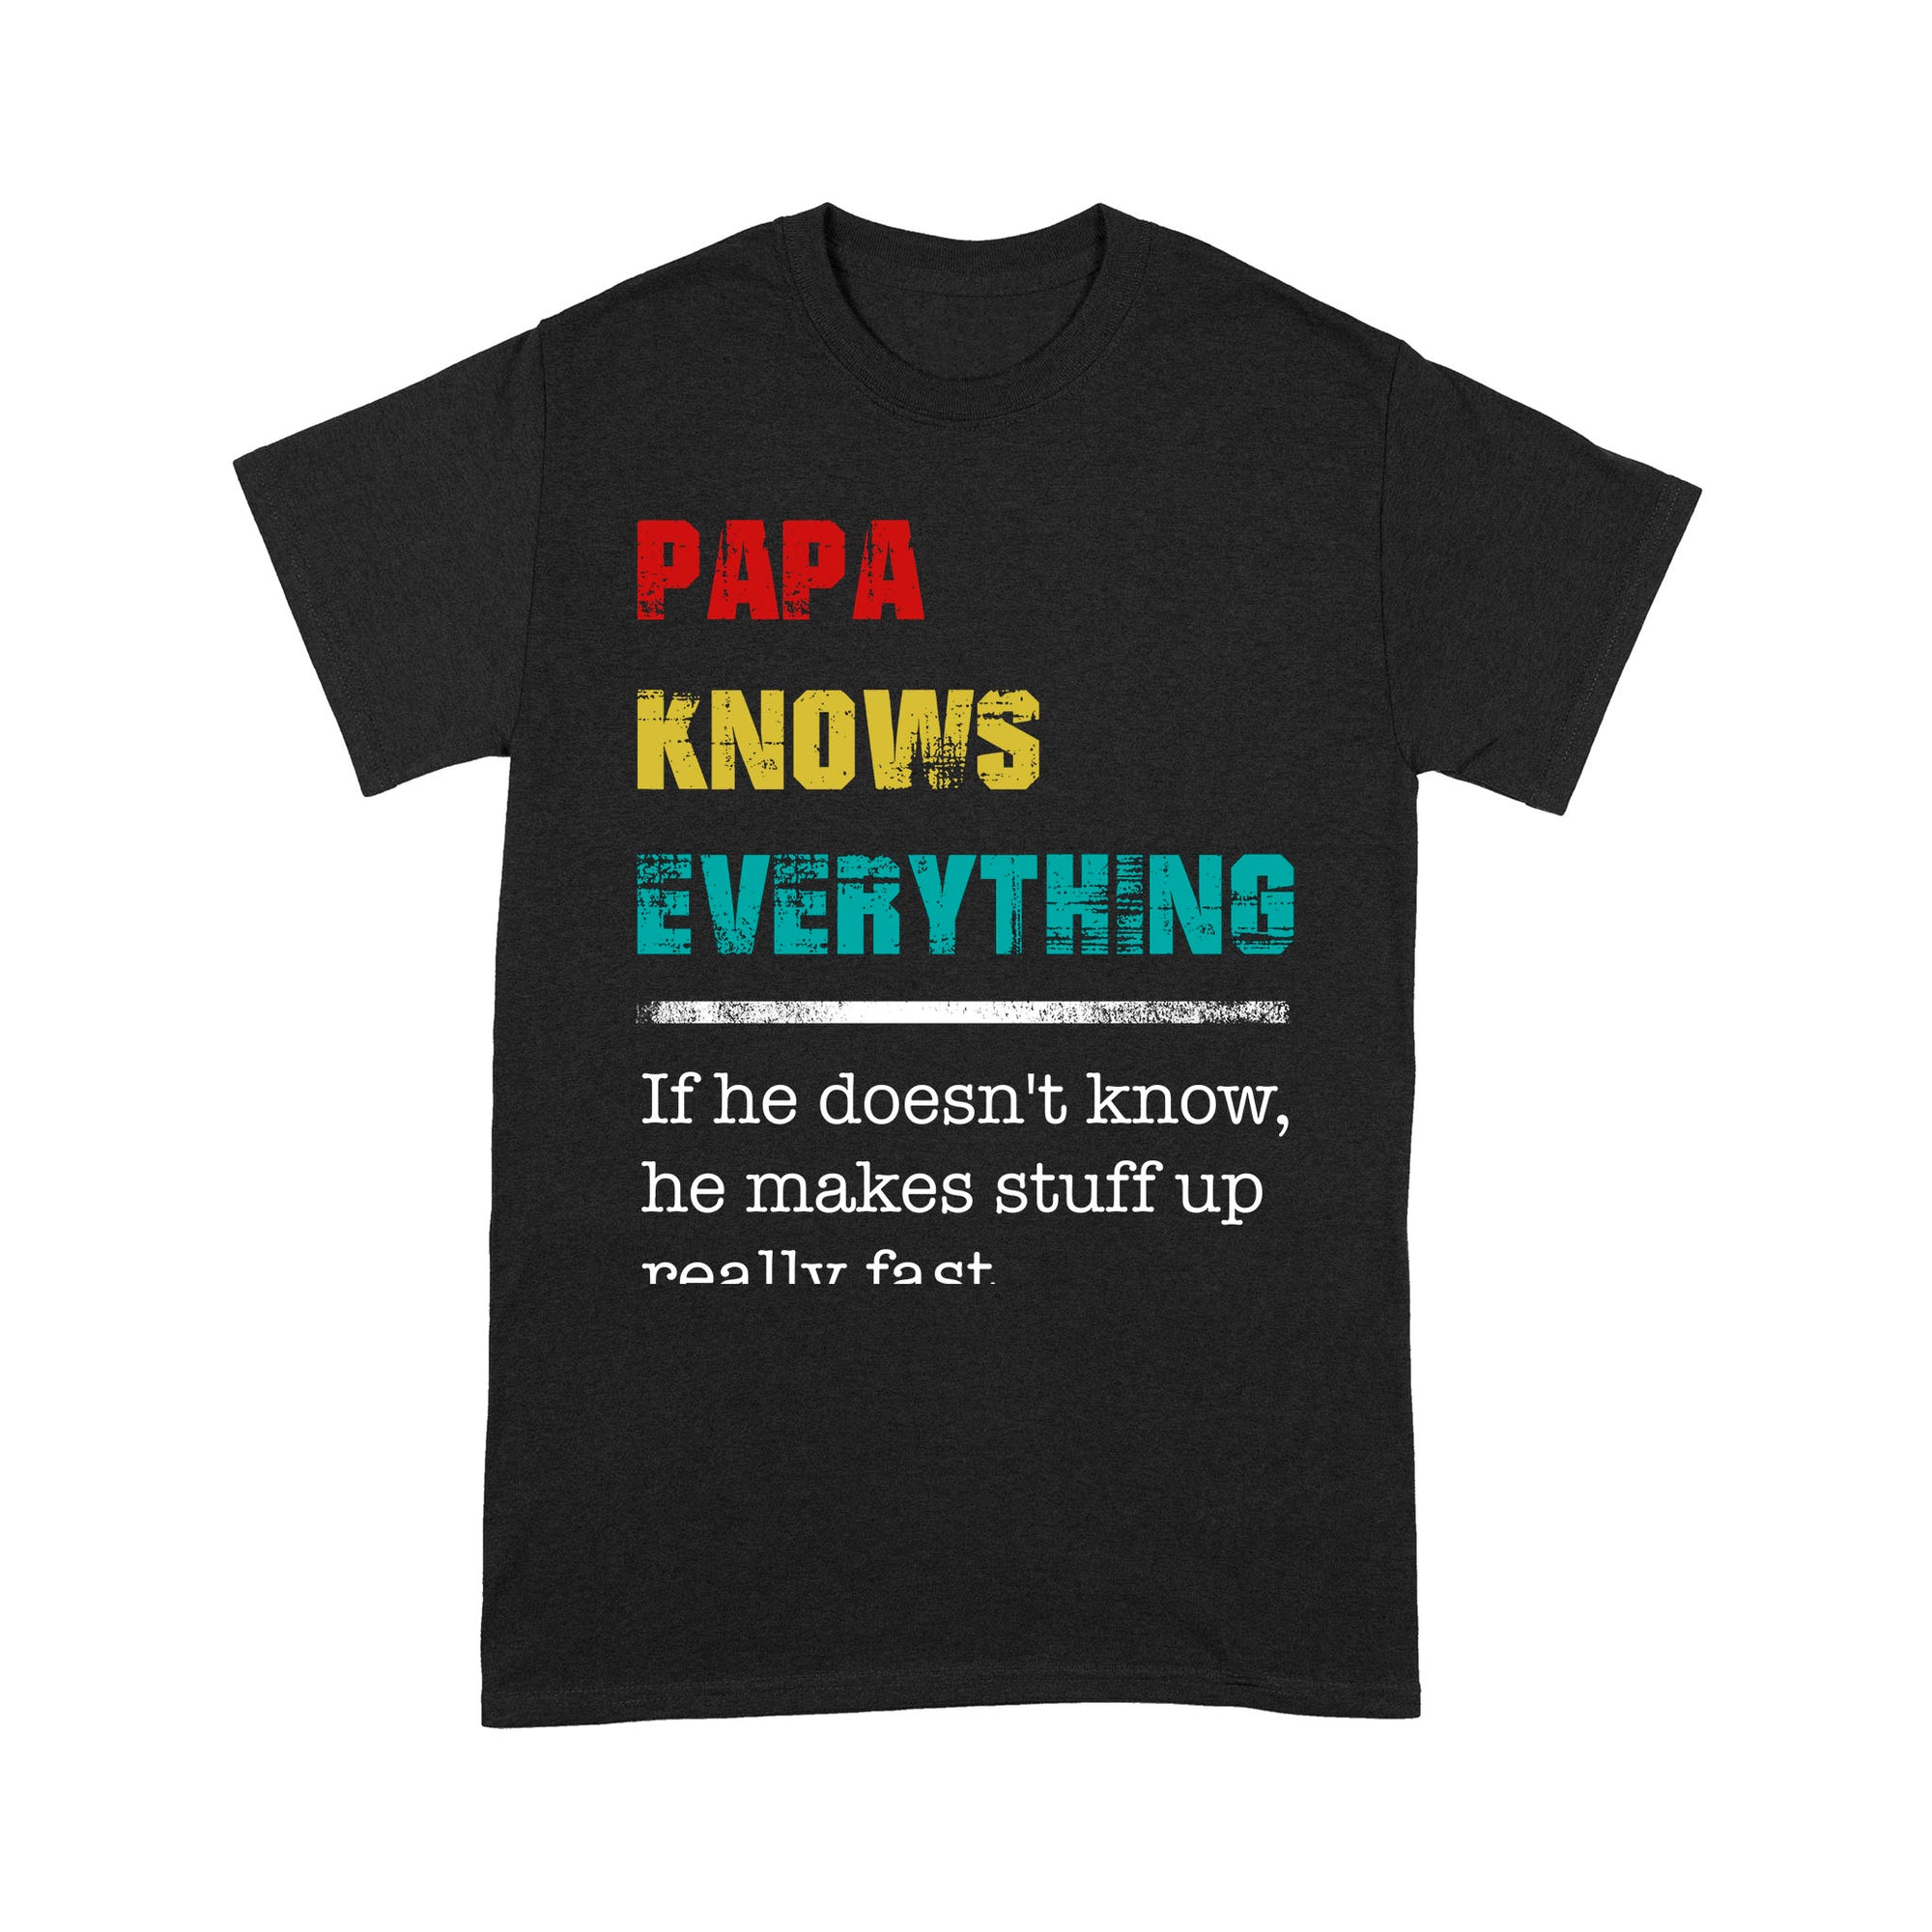 Funny Papa Quotes Sayings Papa Knows Everything If He Doesnt Know He Makes Stuff Up Really Fast Custom Design Gift Ideas For Men Grandpa Dad Papa - Standard T-shirt